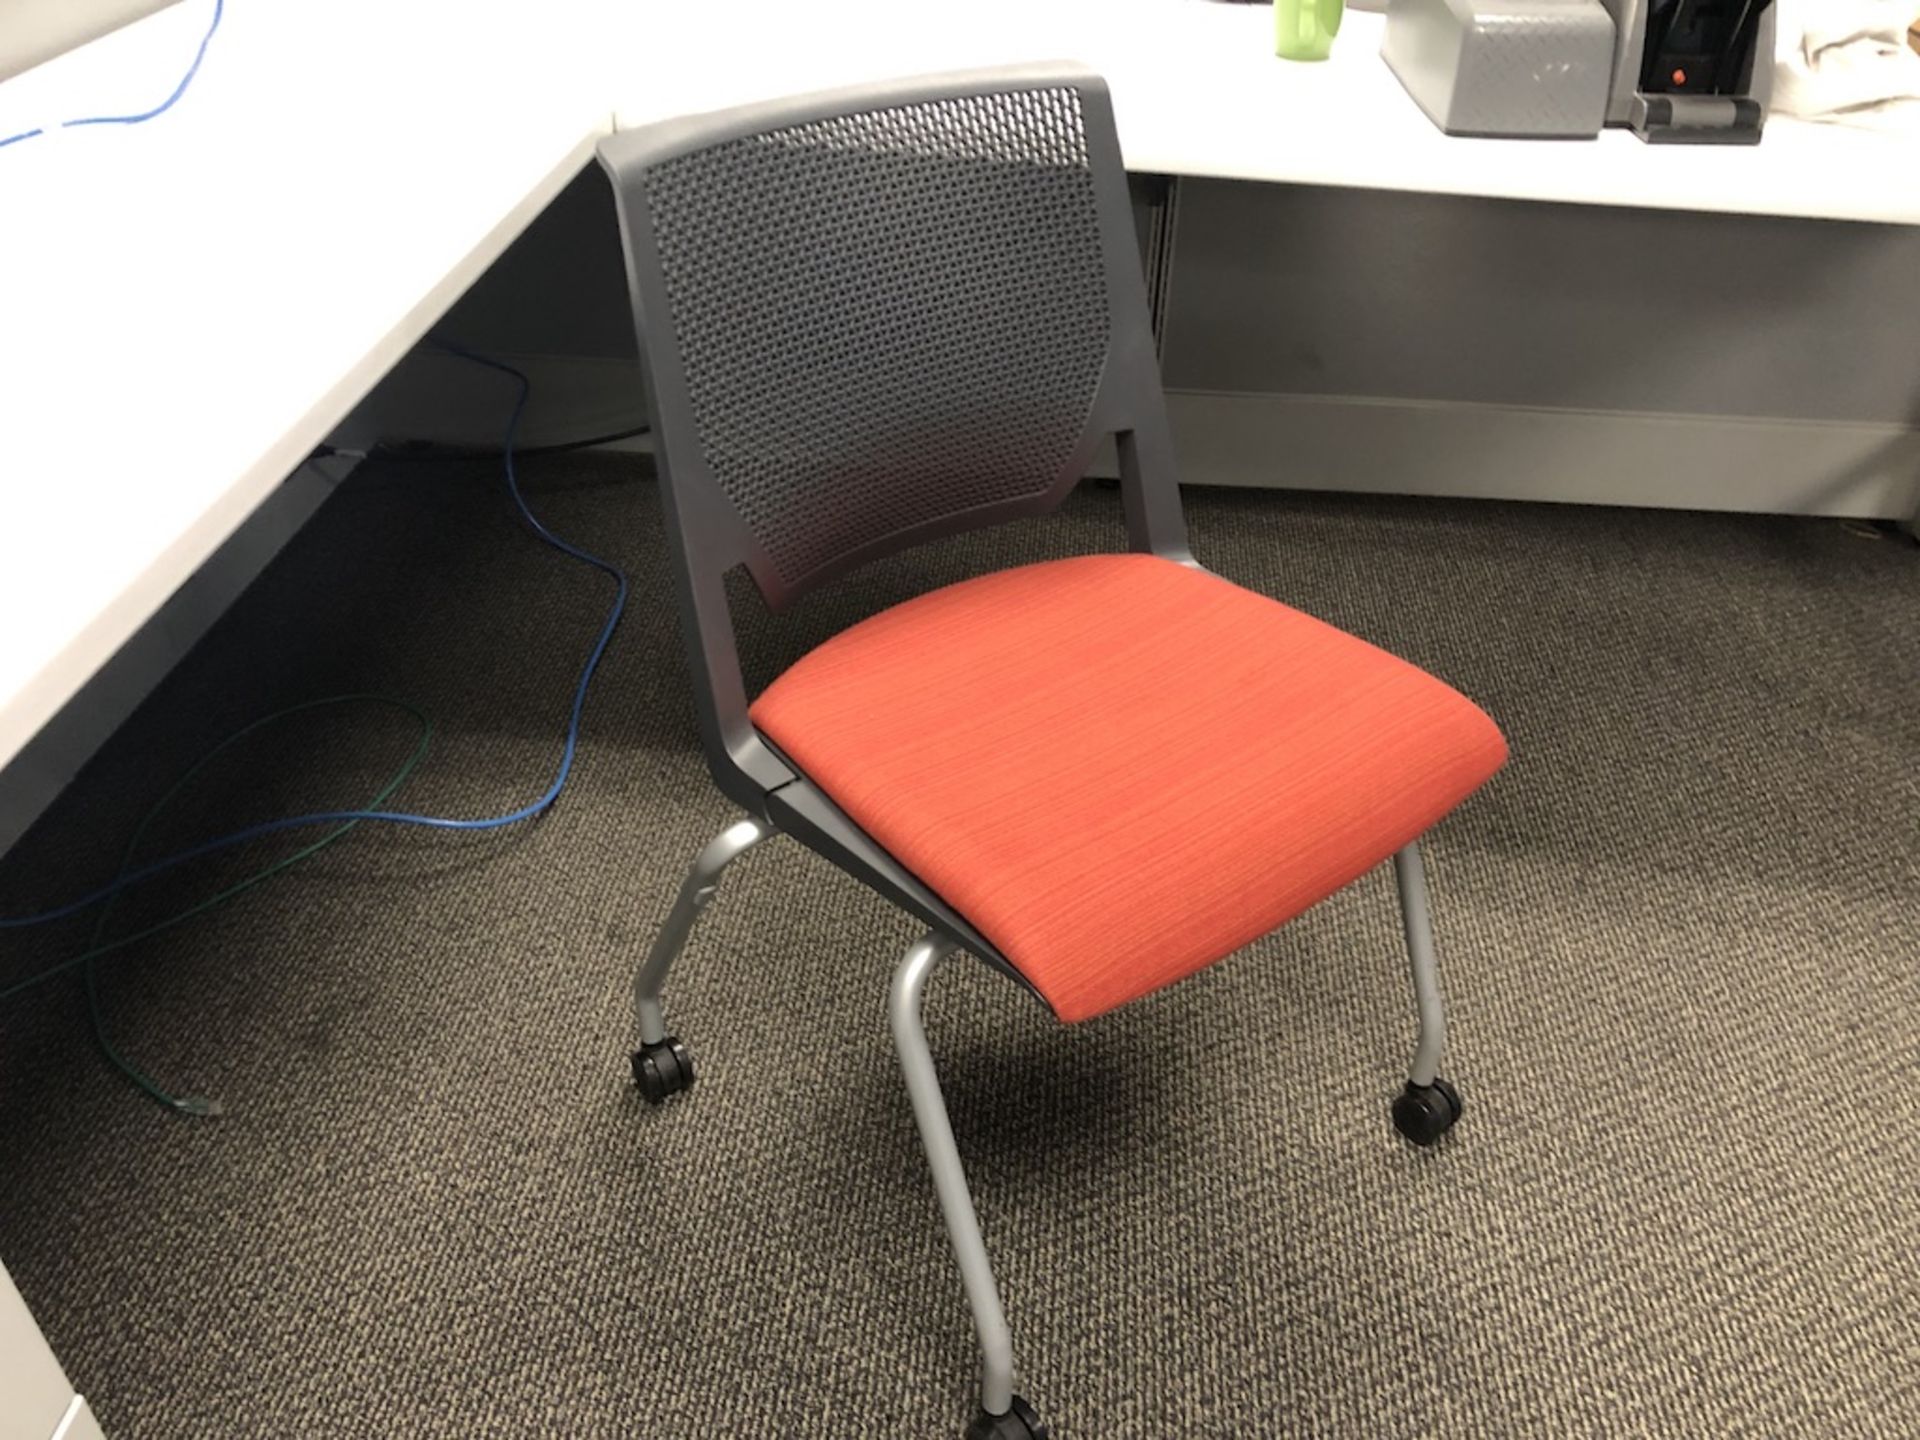 4 CASTER OFFICE CHAIR RED SEATING PAD   SCHNEIDER ELECTRIC- 6611 PRESTON AVE SUITE A - Image 2 of 3